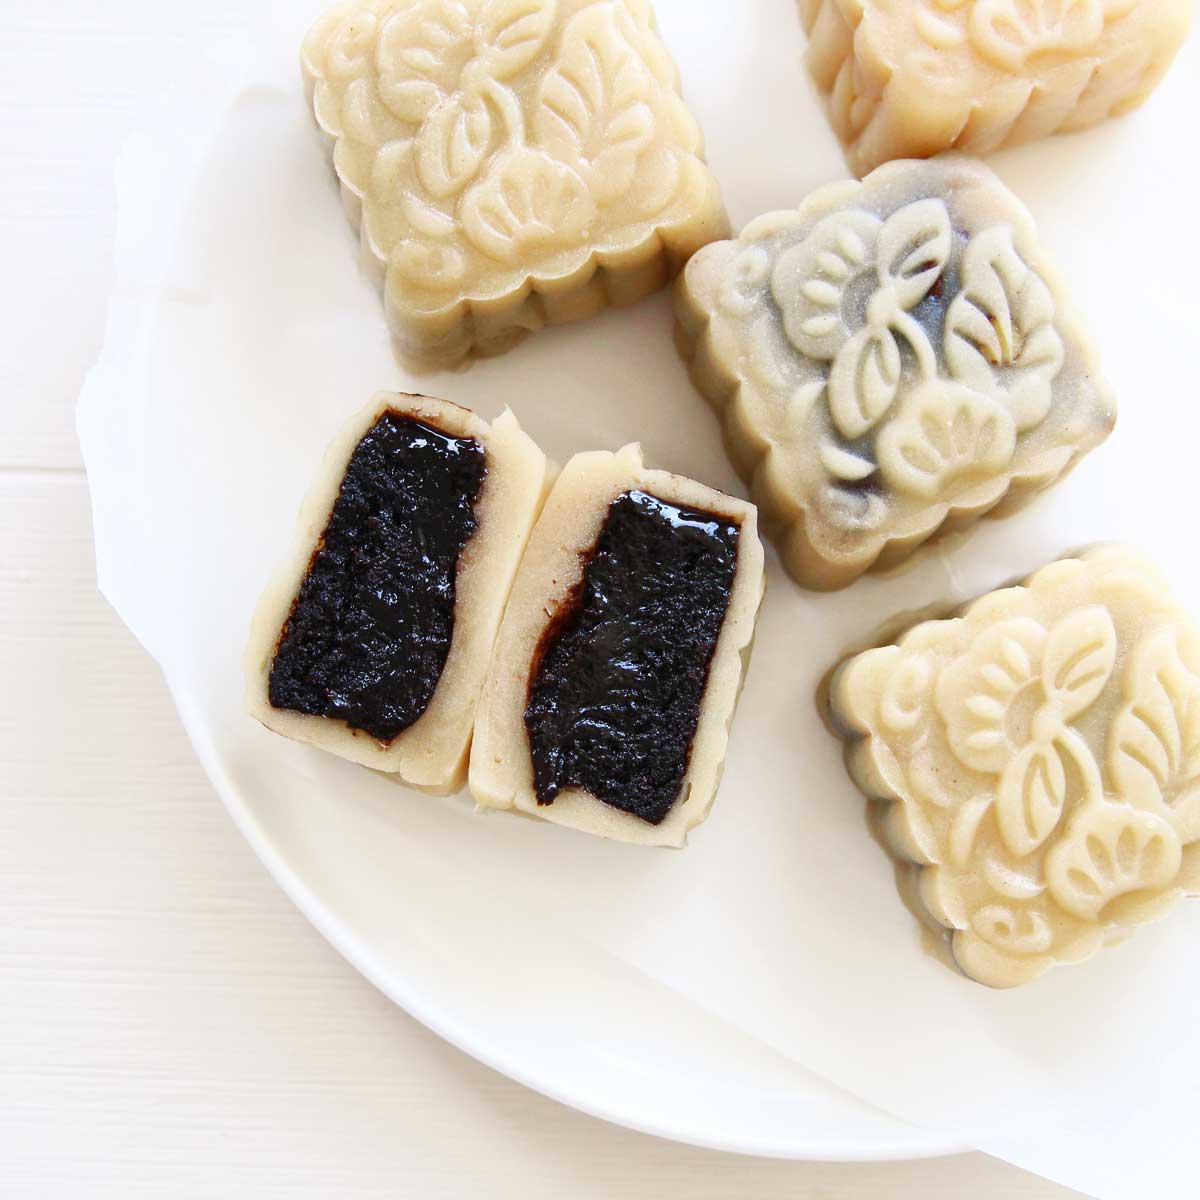 Peanut Butter Snow Skin Mooncakes with Brownie FIlling - Sweet Taro Paste